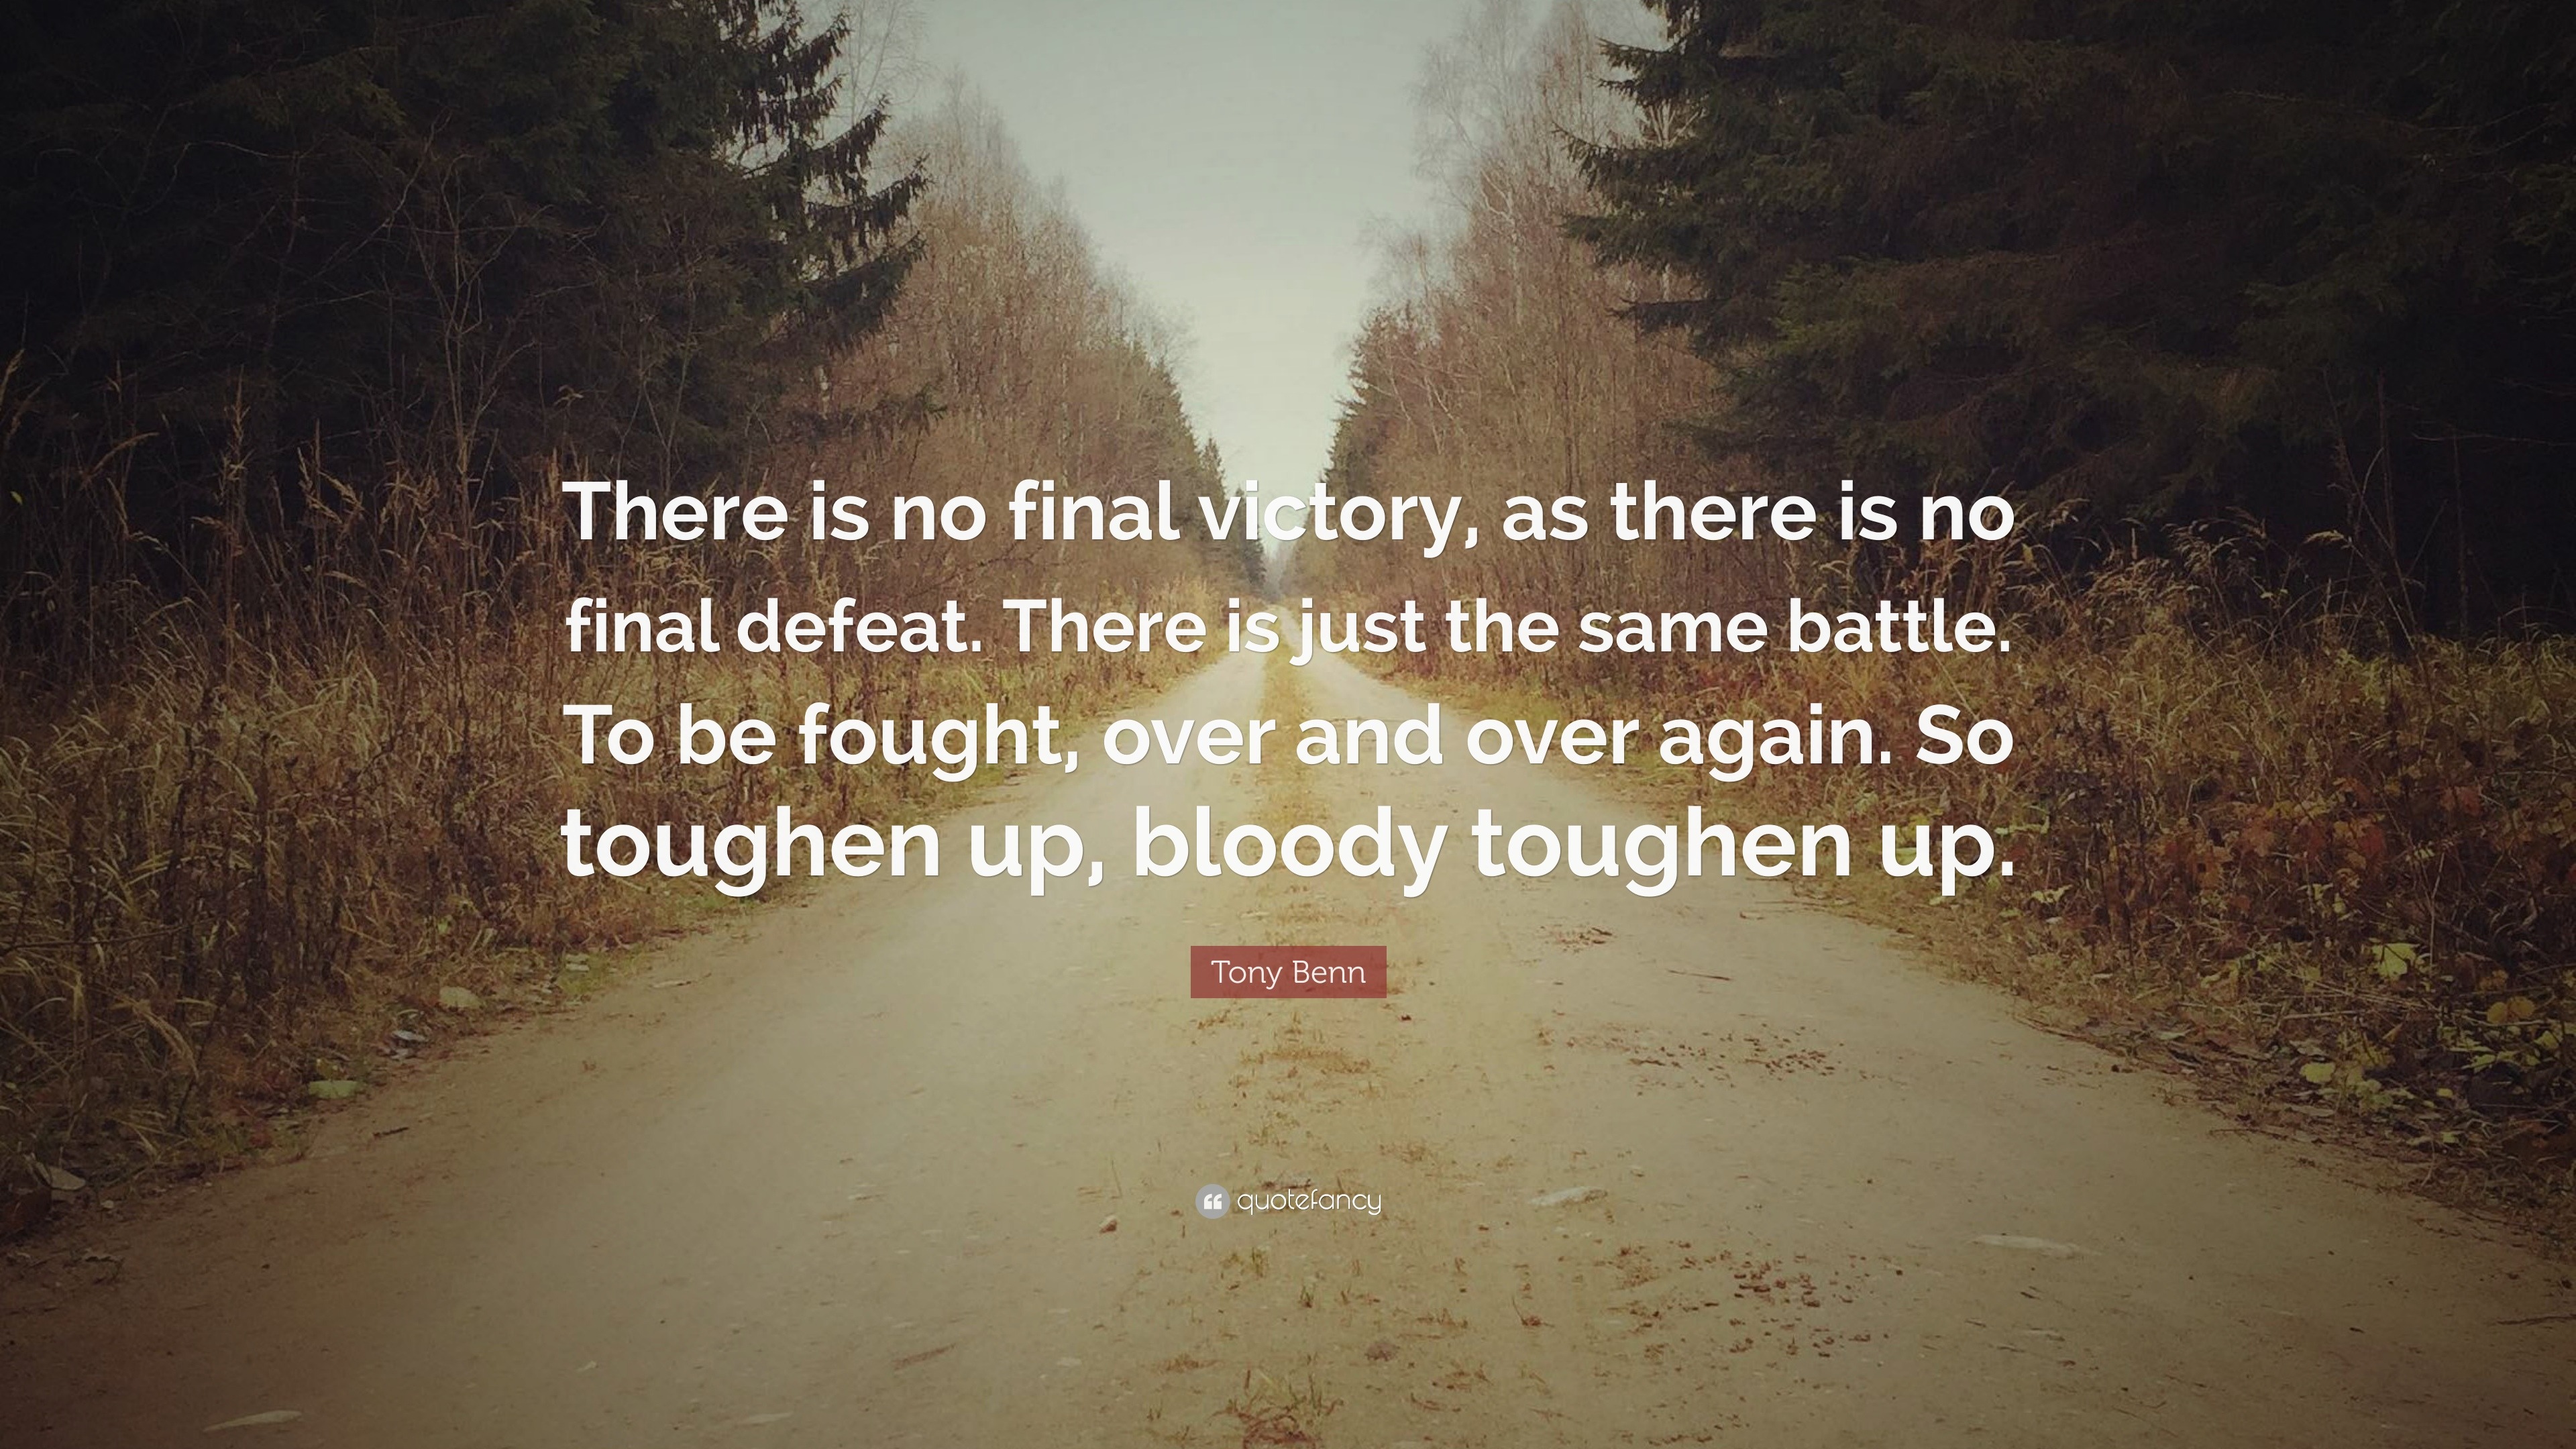 Tony Benn Quote There Is No Final Victory As There Is No Final Defeat There Is Just The Same Battle To Be Fought Over And Over Again